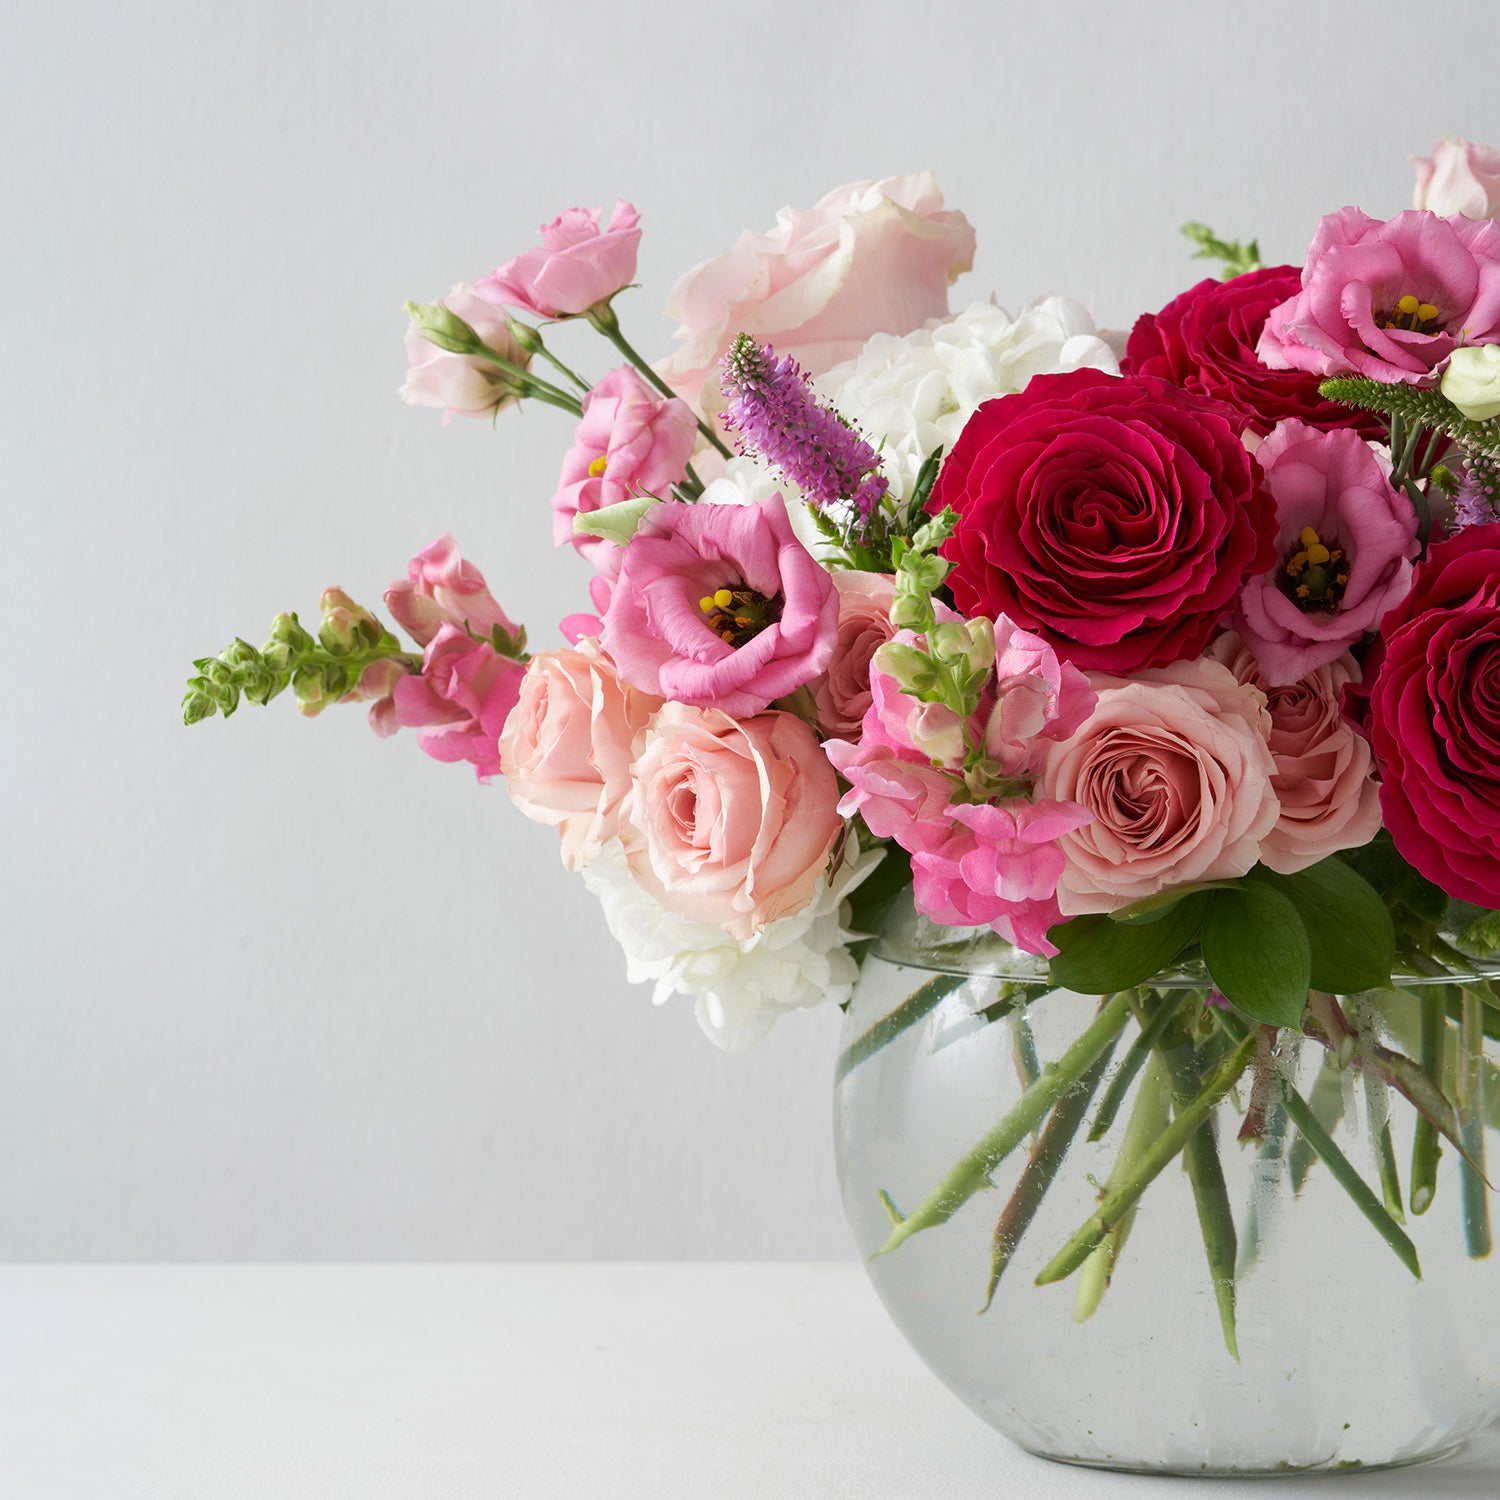 Various shades of pink flowers arranged in clear glass bowl,on white background.